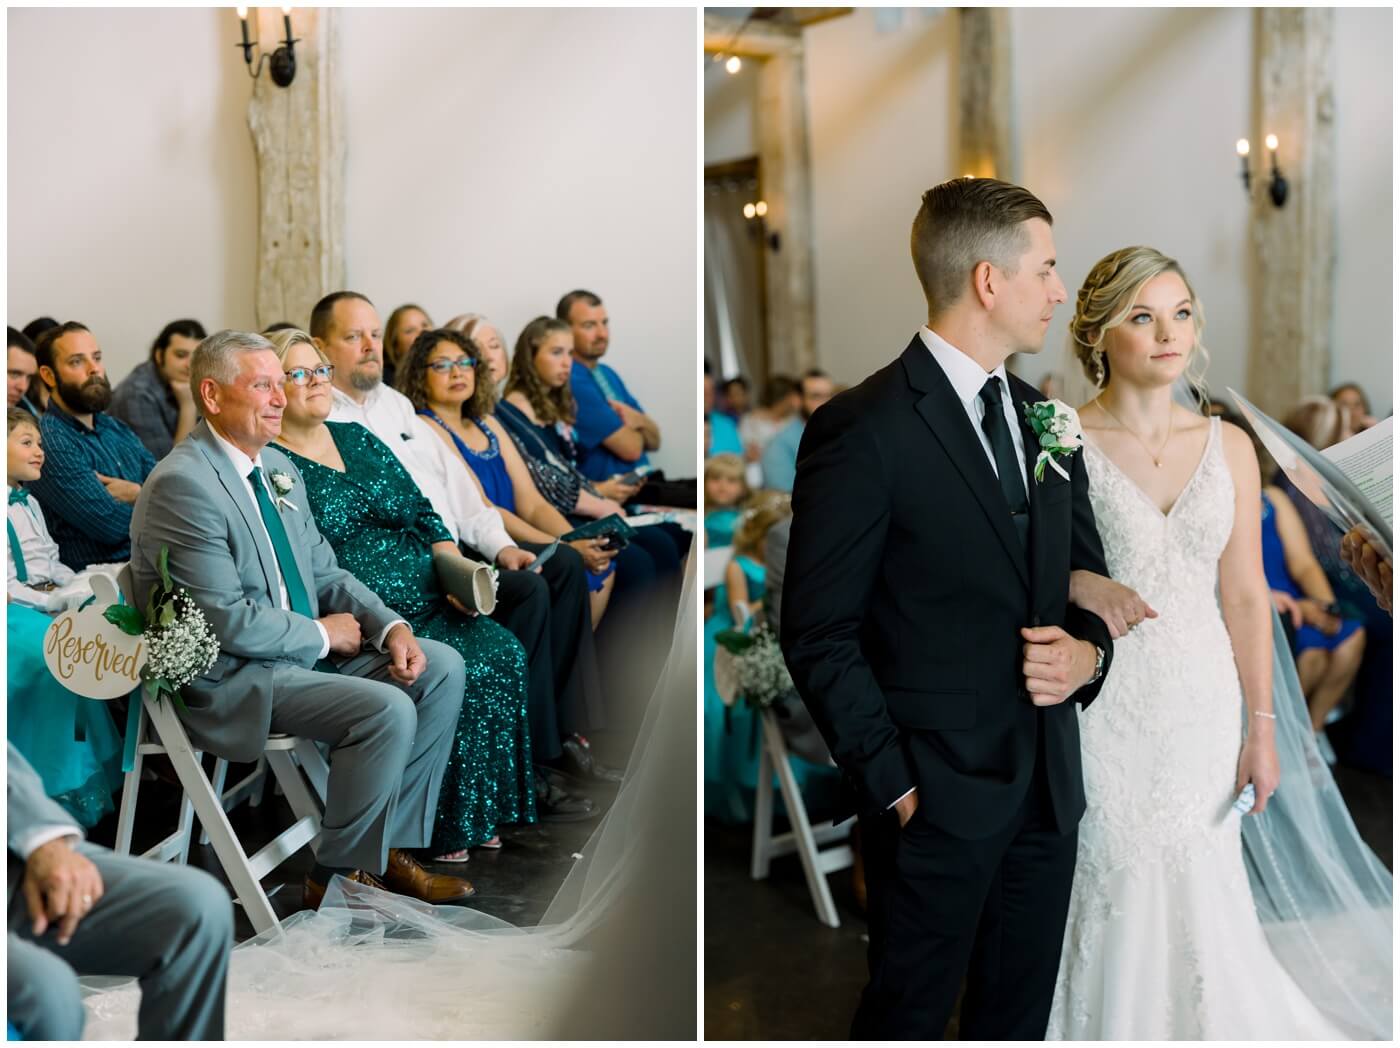 Guests smile during the wedding ceremony